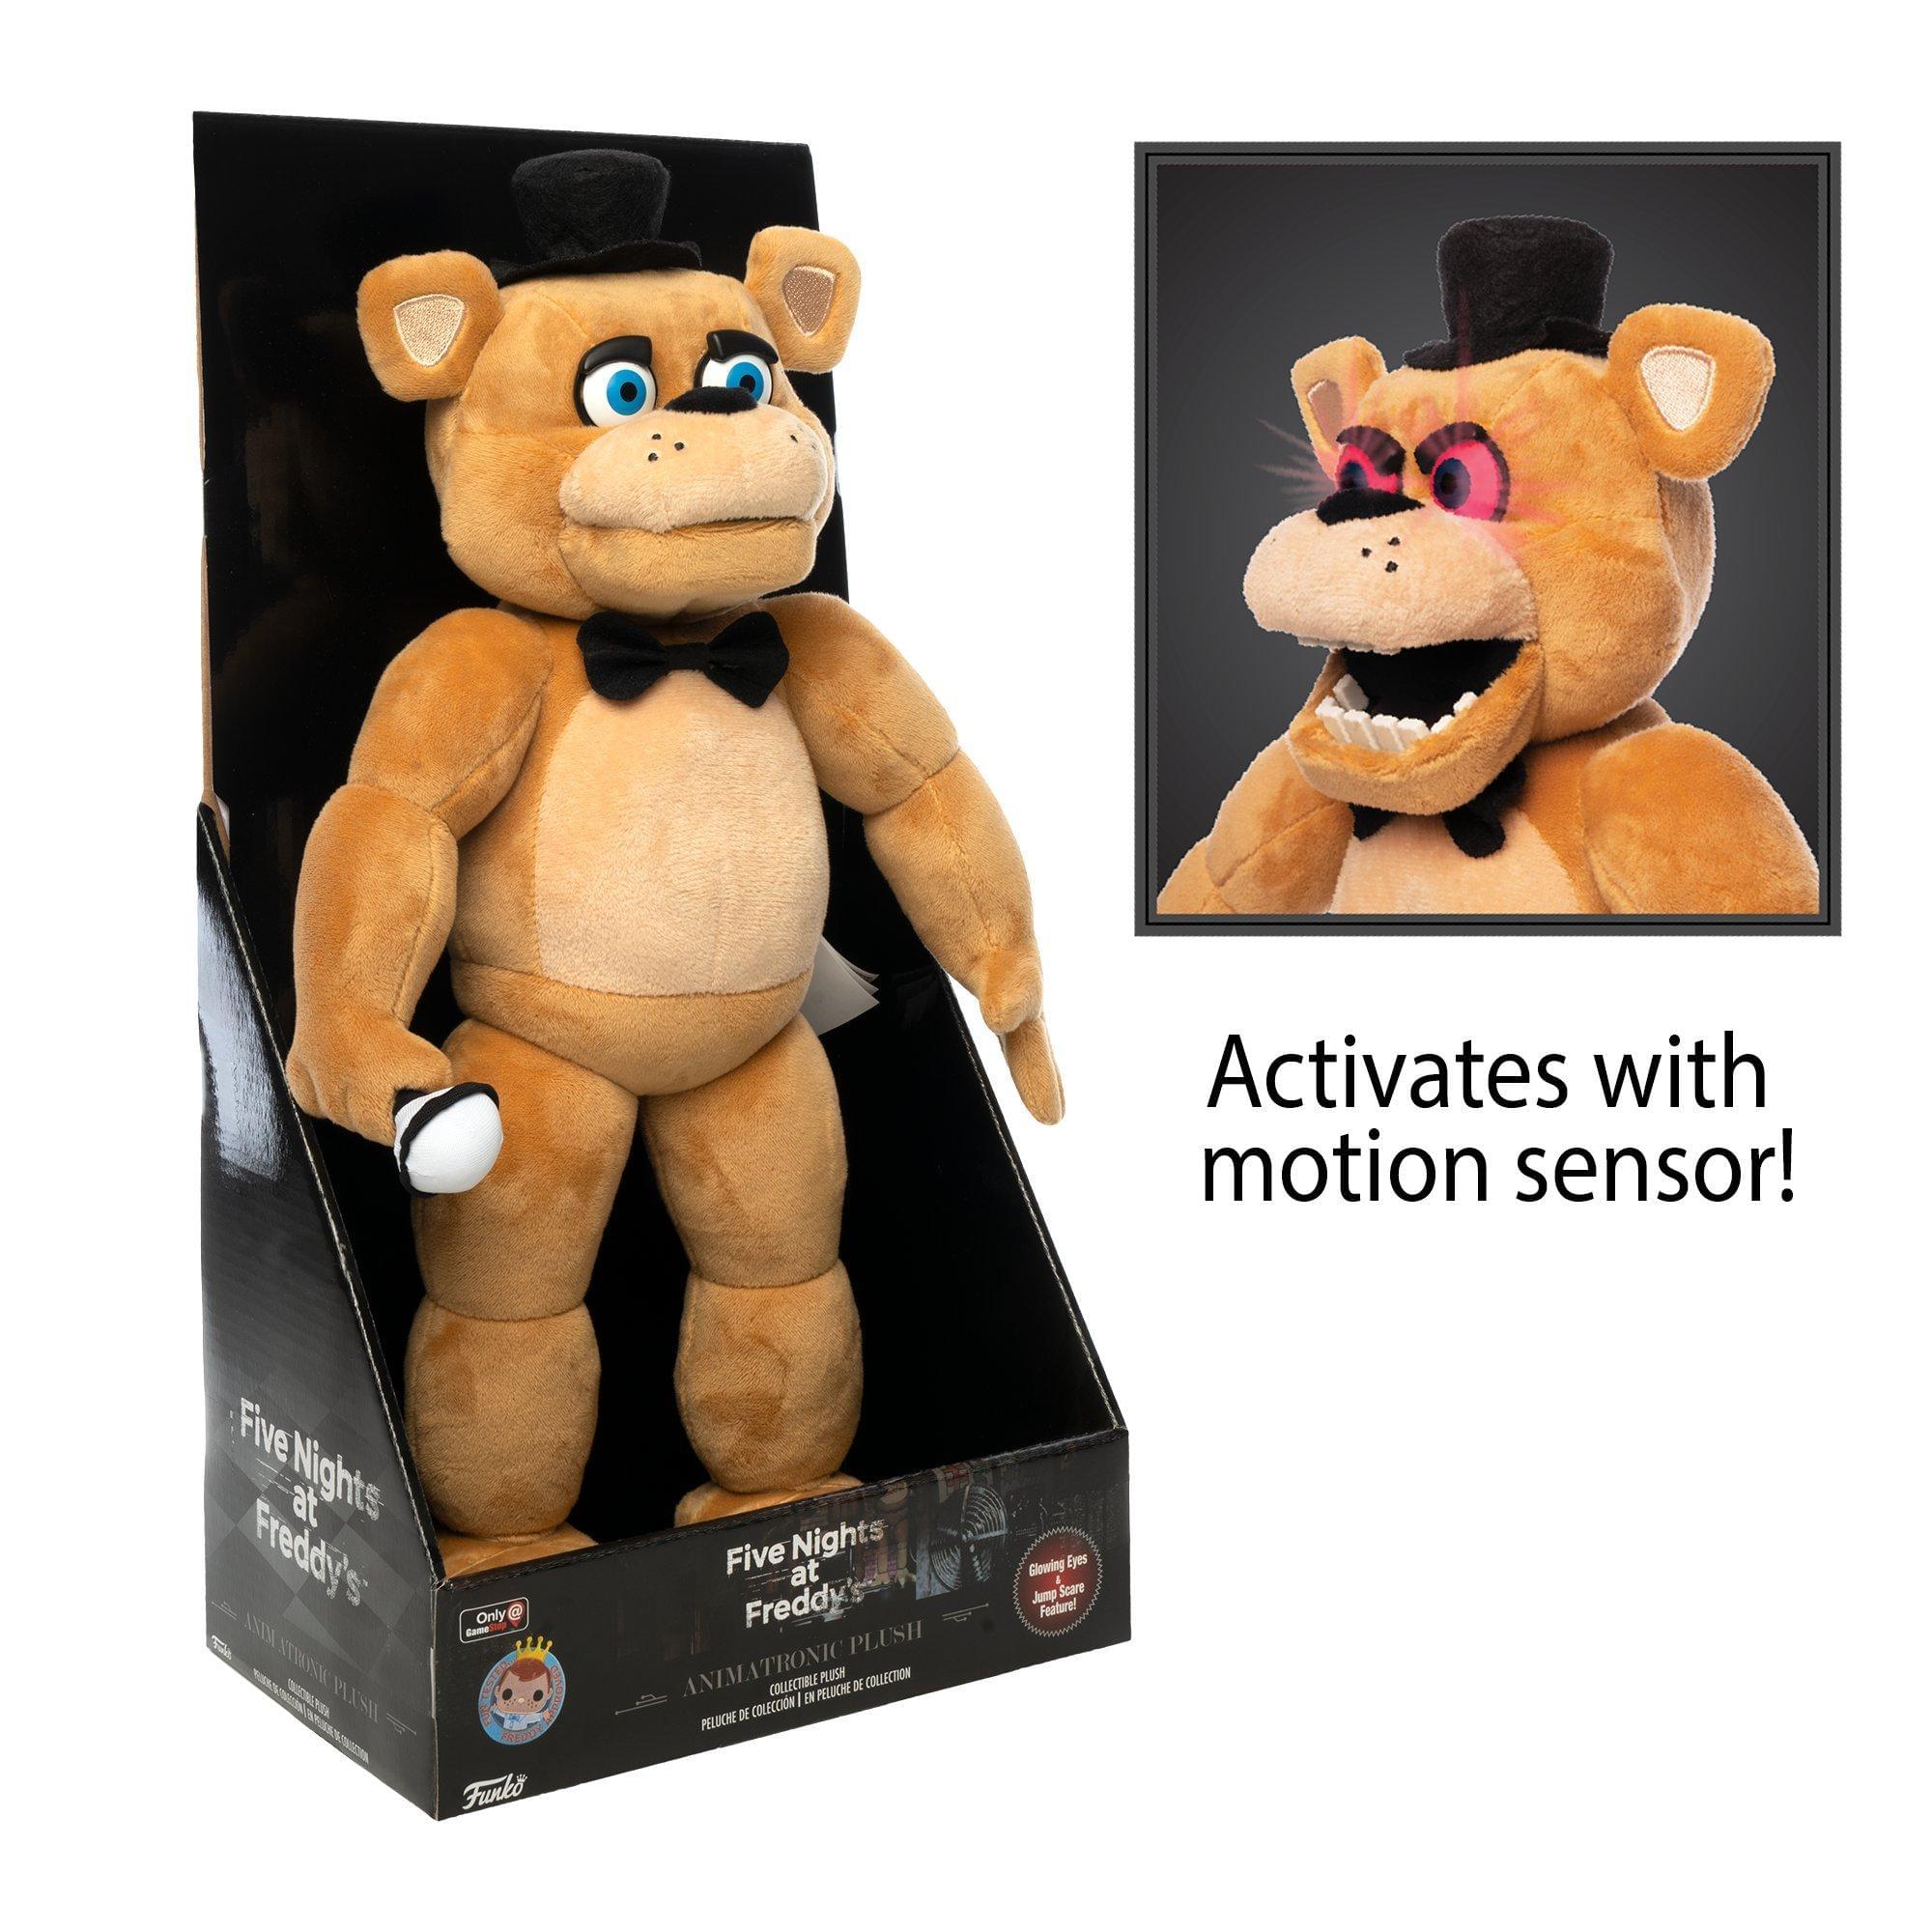  Funko Five Nights at Freddy's Scare-in-The-Box Game